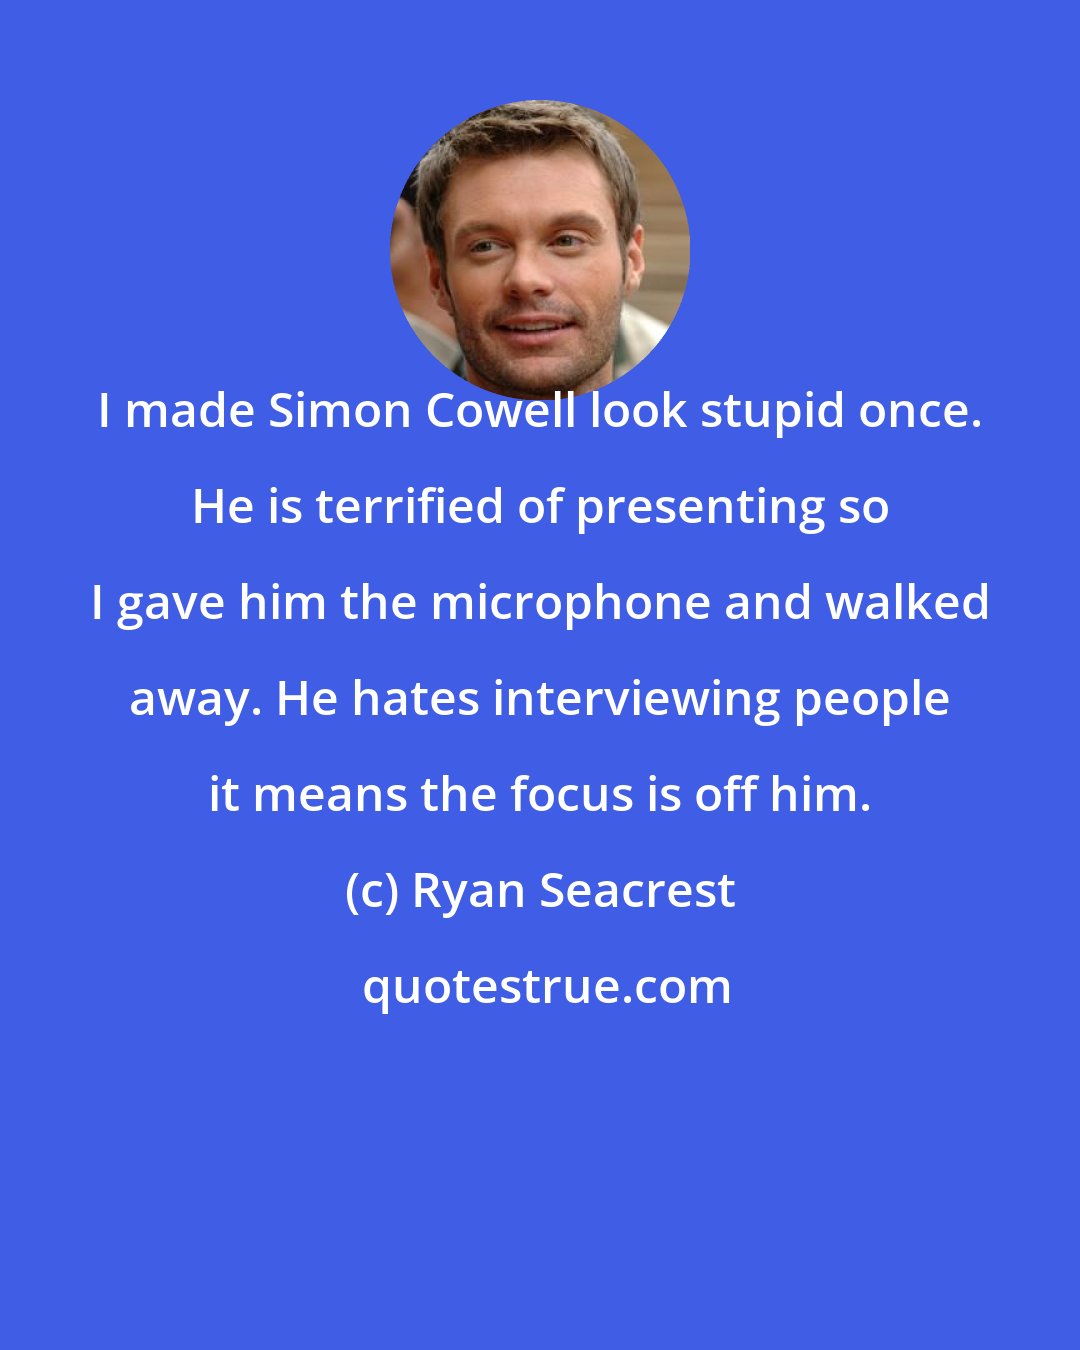 Ryan Seacrest: I made Simon Cowell look stupid once. He is terrified of presenting so I gave him the microphone and walked away. He hates interviewing people it means the focus is off him.